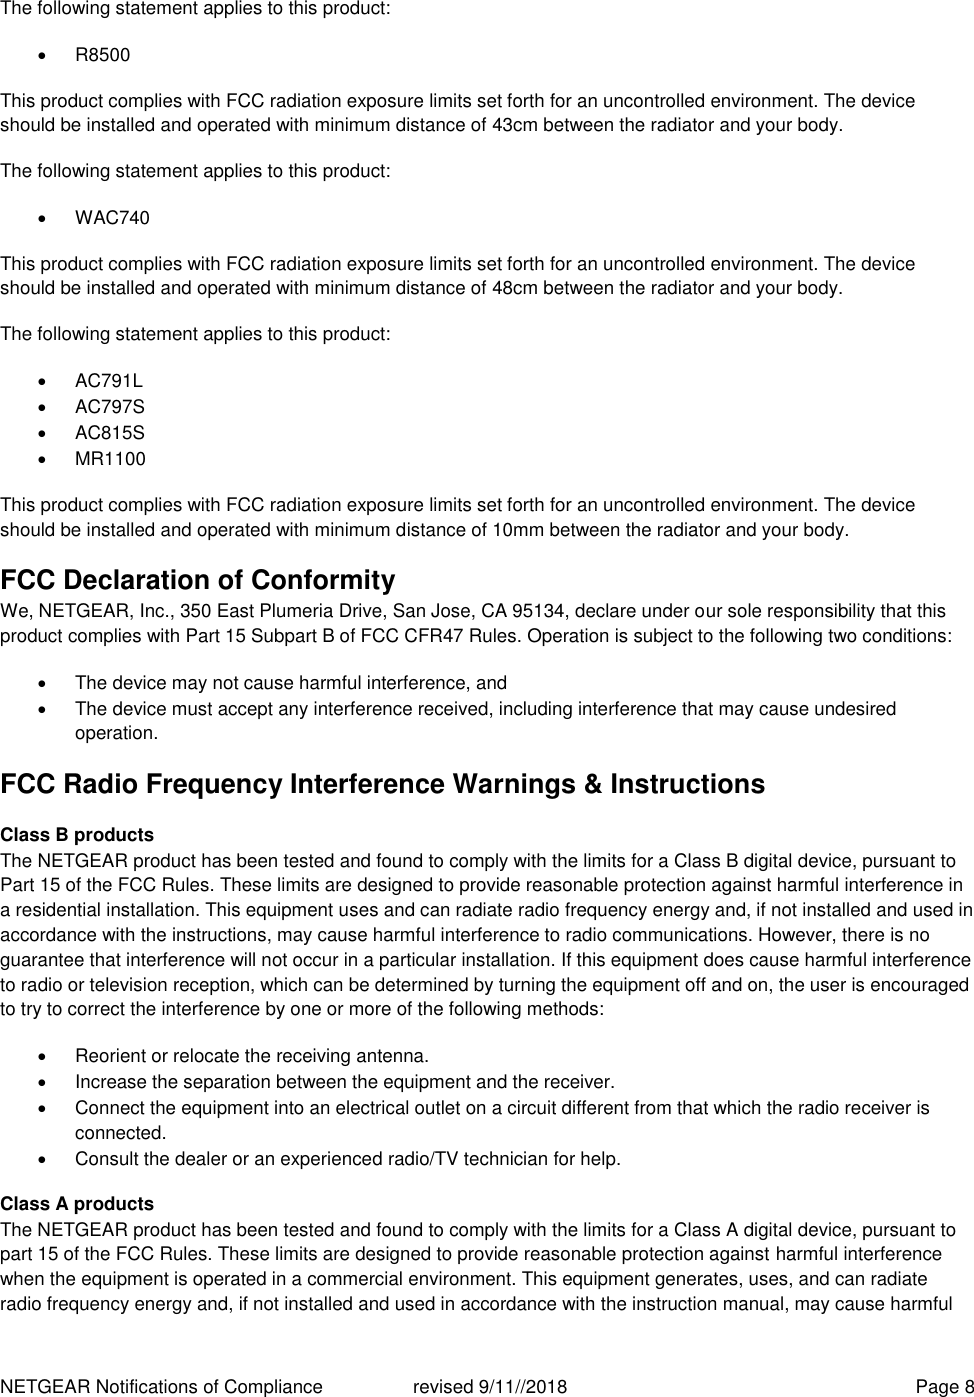 NETGEAR Notifications of Compliance    revised 9/11//2018  Page 8 The following statement applies to this product:   R8500 This product complies with FCC radiation exposure limits set forth for an uncontrolled environment. The device should be installed and operated with minimum distance of 43cm between the radiator and your body. The following statement applies to this product:   WAC740 This product complies with FCC radiation exposure limits set forth for an uncontrolled environment. The device should be installed and operated with minimum distance of 48cm between the radiator and your body. The following statement applies to this product:   AC791L   AC797S   AC815S   MR1100 This product complies with FCC radiation exposure limits set forth for an uncontrolled environment. The device should be installed and operated with minimum distance of 10mm between the radiator and your body. FCC Declaration of Conformity We, NETGEAR, Inc., 350 East Plumeria Drive, San Jose, CA 95134, declare under our sole responsibility that this product complies with Part 15 Subpart B of FCC CFR47 Rules. Operation is subject to the following two conditions:   The device may not cause harmful interference, and   The device must accept any interference received, including interference that may cause undesired operation. FCC Radio Frequency Interference Warnings &amp; Instructions Class B products The NETGEAR product has been tested and found to comply with the limits for a Class B digital device, pursuant to Part 15 of the FCC Rules. These limits are designed to provide reasonable protection against harmful interference in a residential installation. This equipment uses and can radiate radio frequency energy and, if not installed and used in accordance with the instructions, may cause harmful interference to radio communications. However, there is no guarantee that interference will not occur in a particular installation. If this equipment does cause harmful interference to radio or television reception, which can be determined by turning the equipment off and on, the user is encouraged to try to correct the interference by one or more of the following methods:   Reorient or relocate the receiving antenna.   Increase the separation between the equipment and the receiver.   Connect the equipment into an electrical outlet on a circuit different from that which the radio receiver is connected.   Consult the dealer or an experienced radio/TV technician for help. Class A products The NETGEAR product has been tested and found to comply with the limits for a Class A digital device, pursuant to part 15 of the FCC Rules. These limits are designed to provide reasonable protection against harmful interference when the equipment is operated in a commercial environment. This equipment generates, uses, and can radiate radio frequency energy and, if not installed and used in accordance with the instruction manual, may cause harmful 